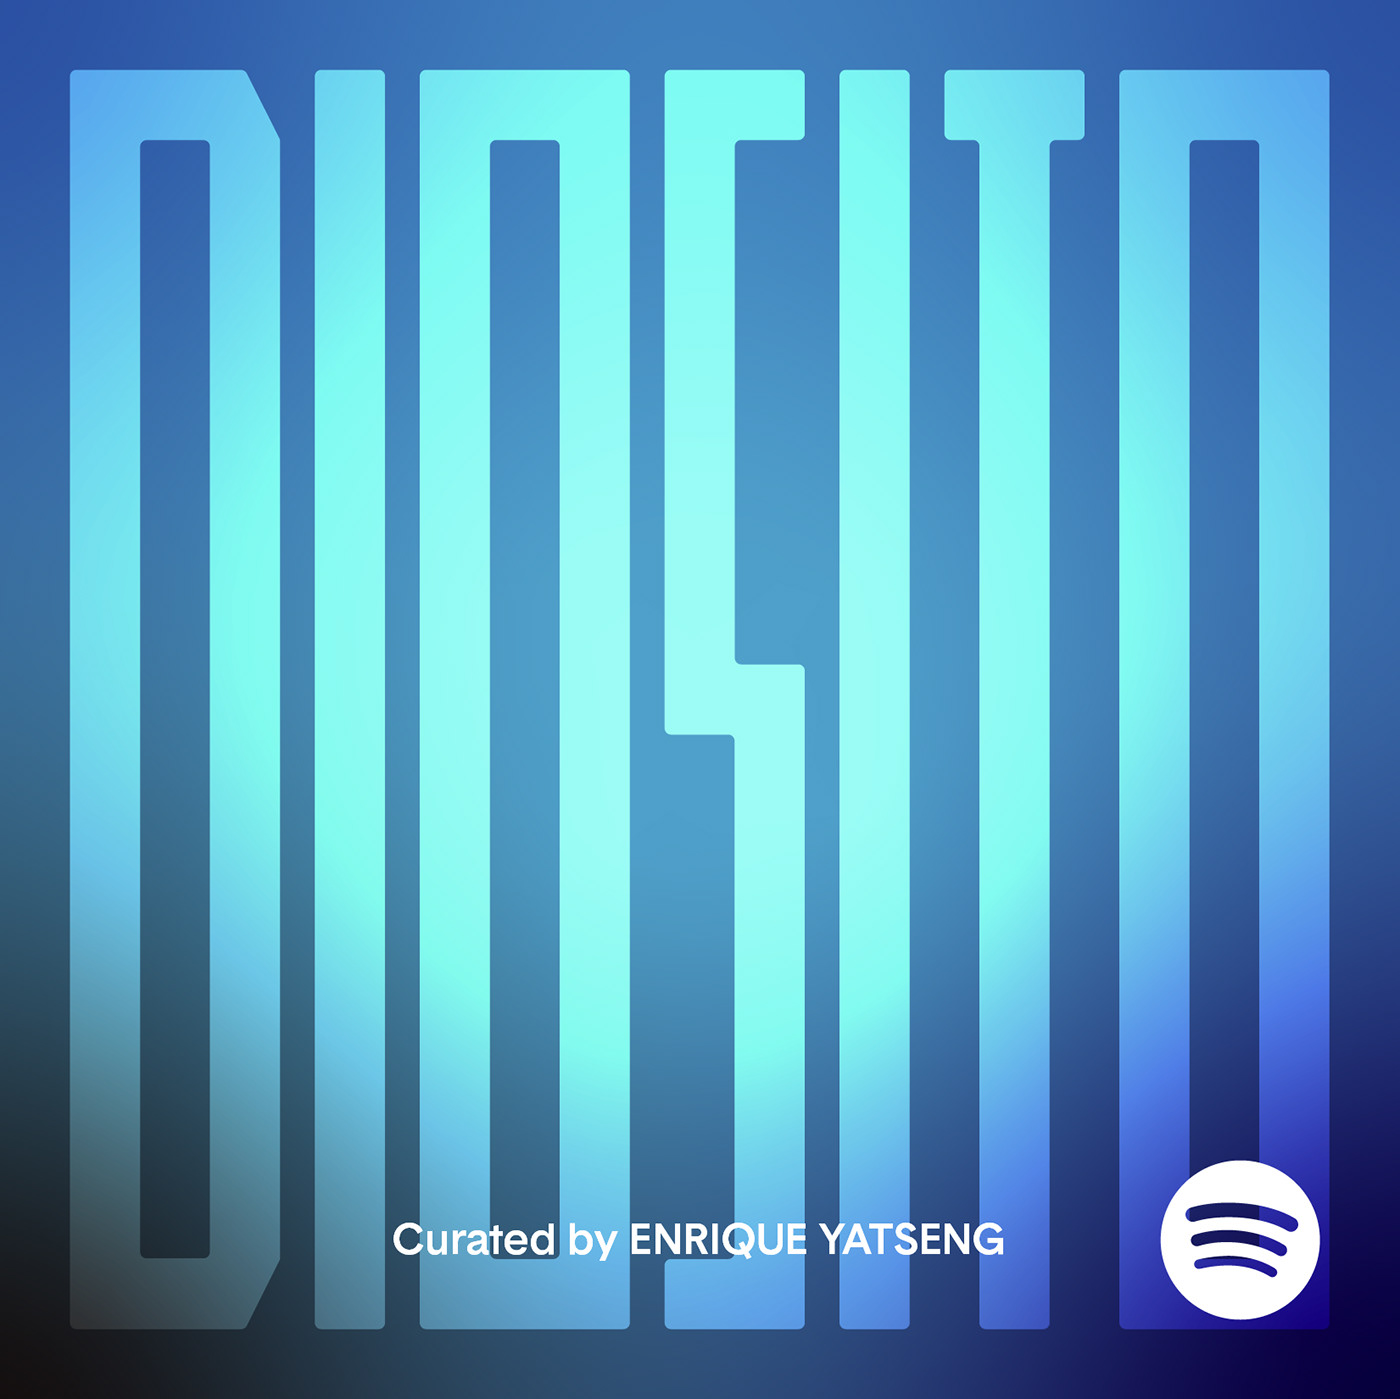 #art #cover   #curator #Design #illustration #music #photography #Playlist #Spotify